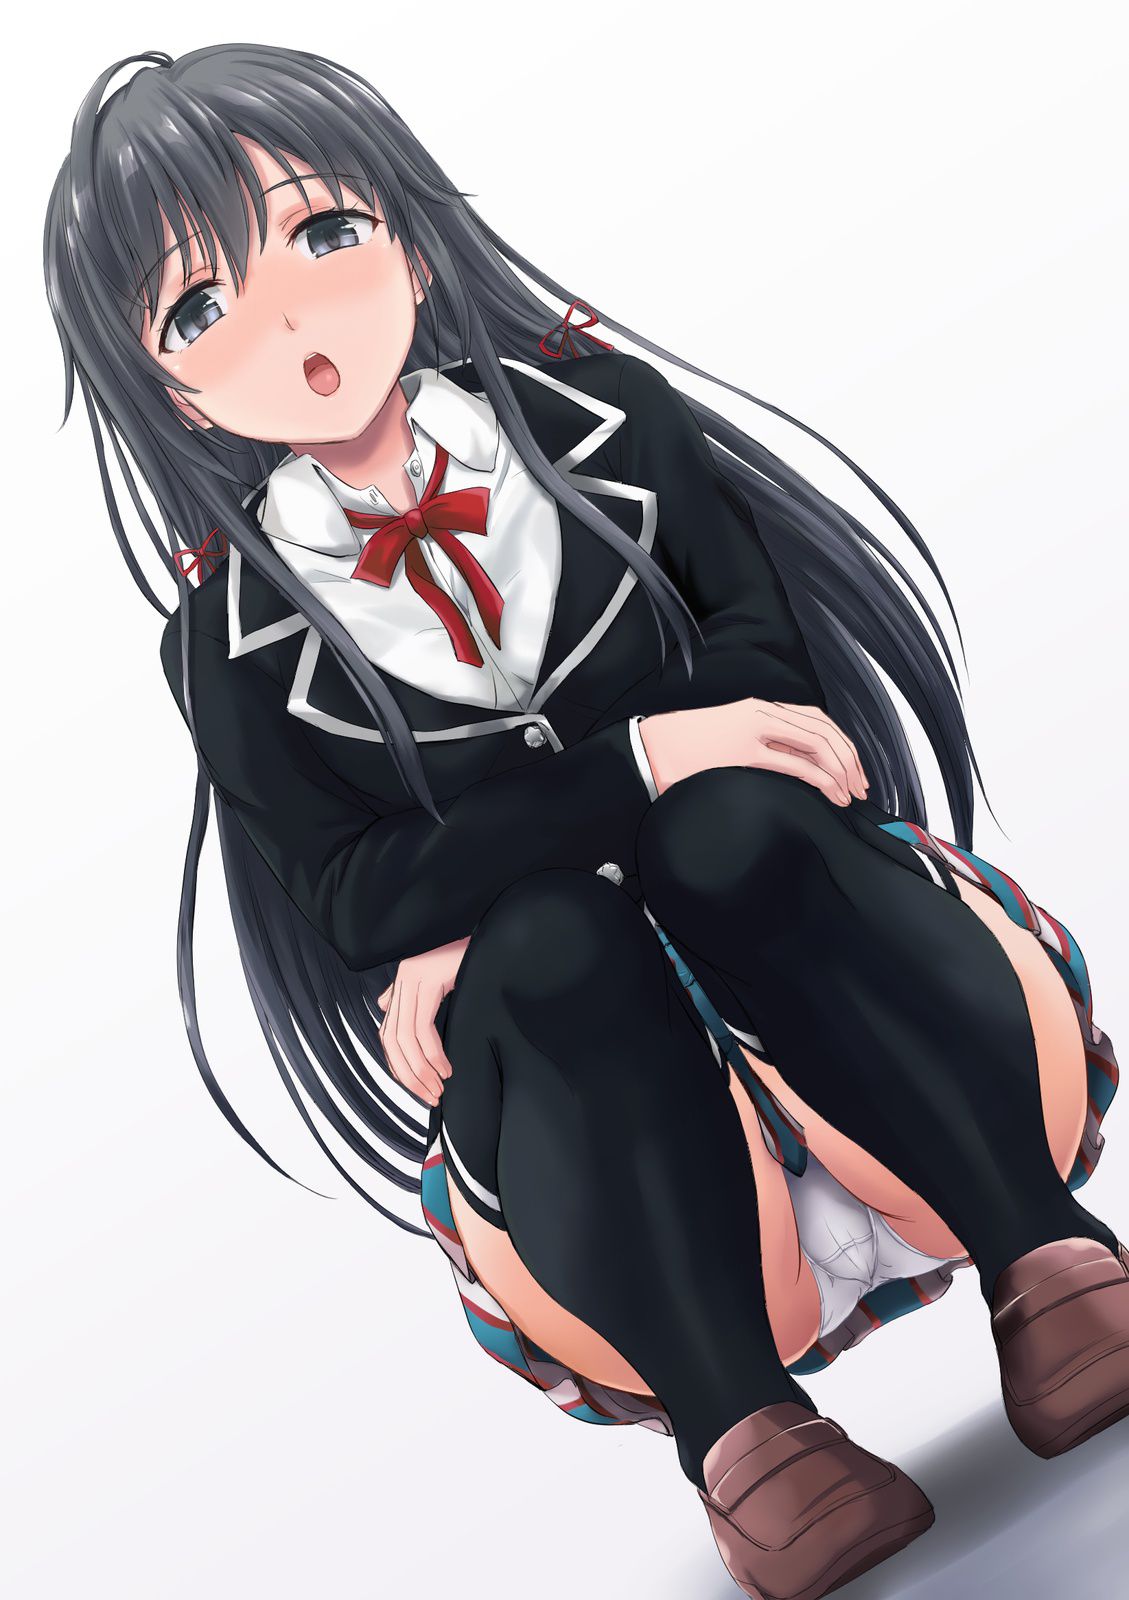 Picture of a girl squatting in a crouching skirt part 3 16